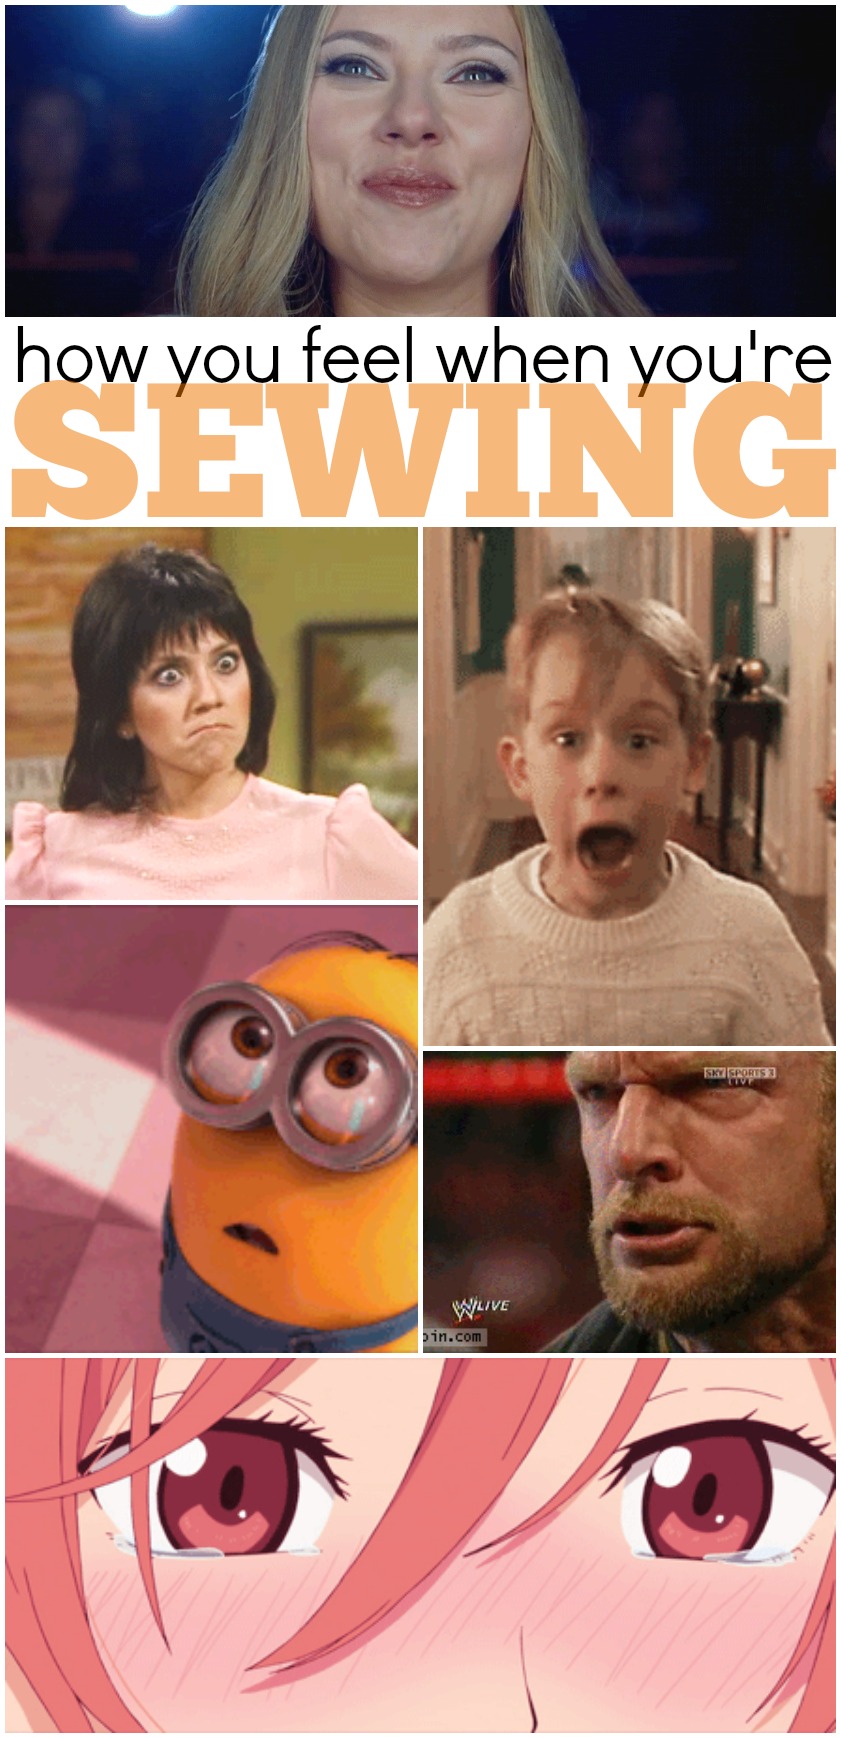 how you feel when you're sewing.